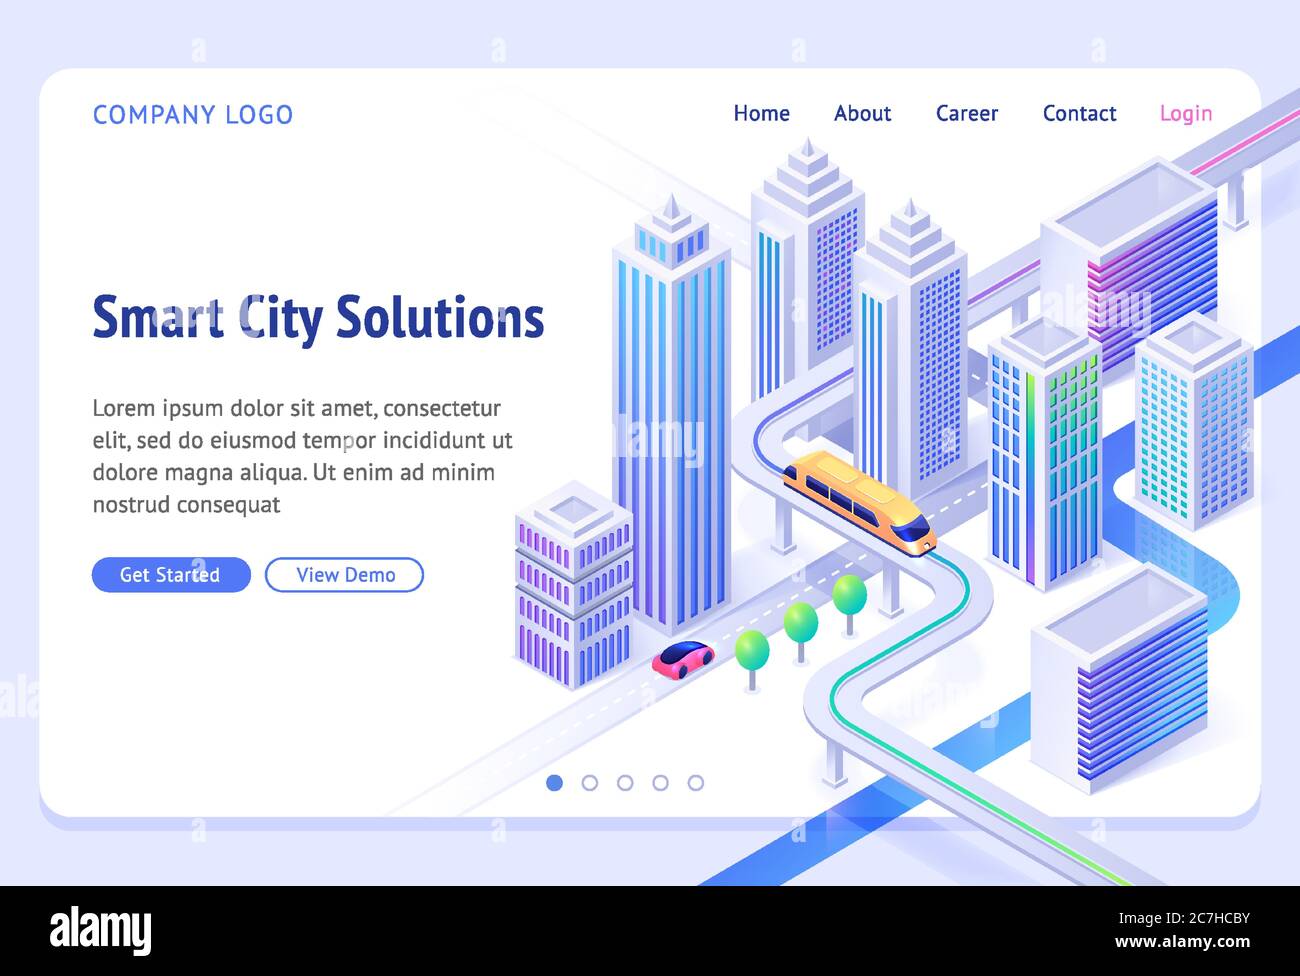 Smart city solutions banner. Sustainable development, urban infrastructure innovation. Vector landing page with isometric illustration of modern town with skyscrapers, monorail train and car road Stock Vector